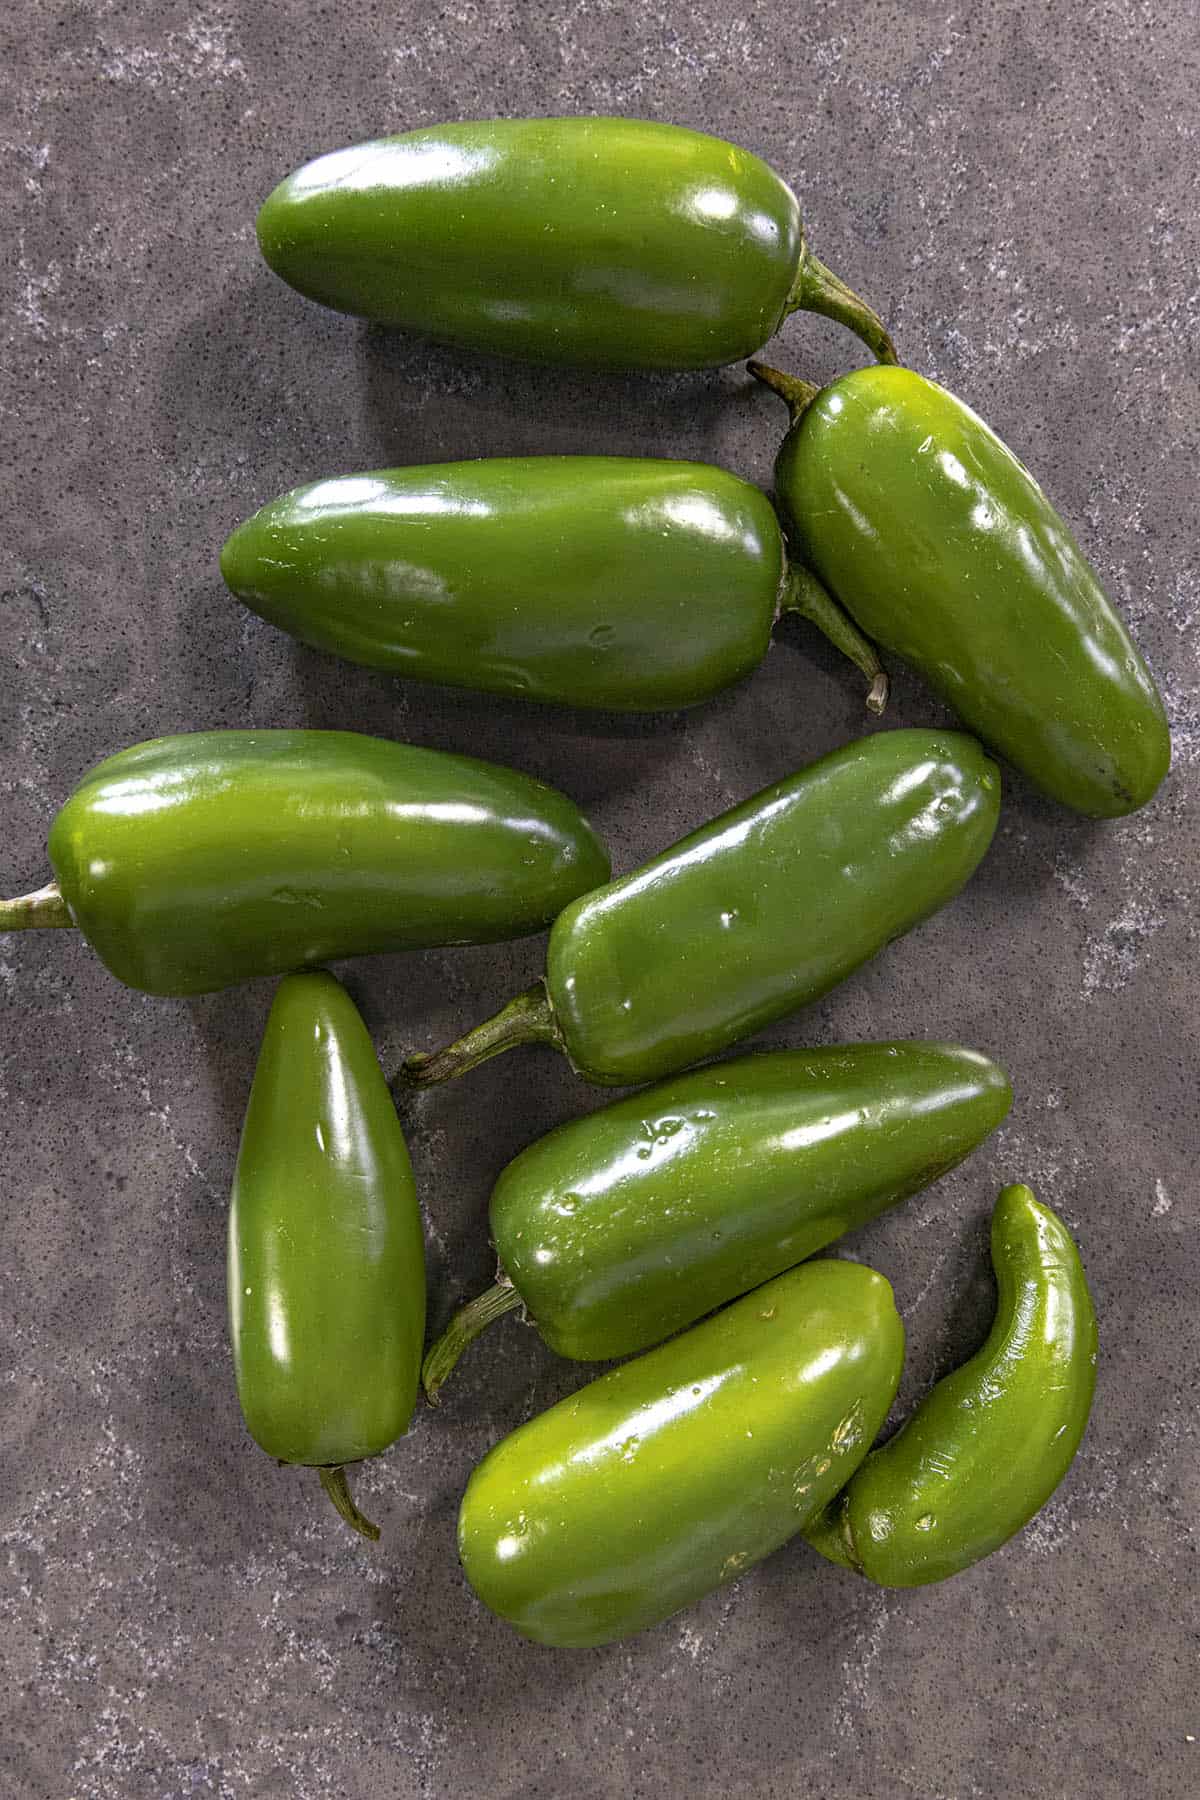 Lots of jalapeno peppers for making Pickled Jalapenos